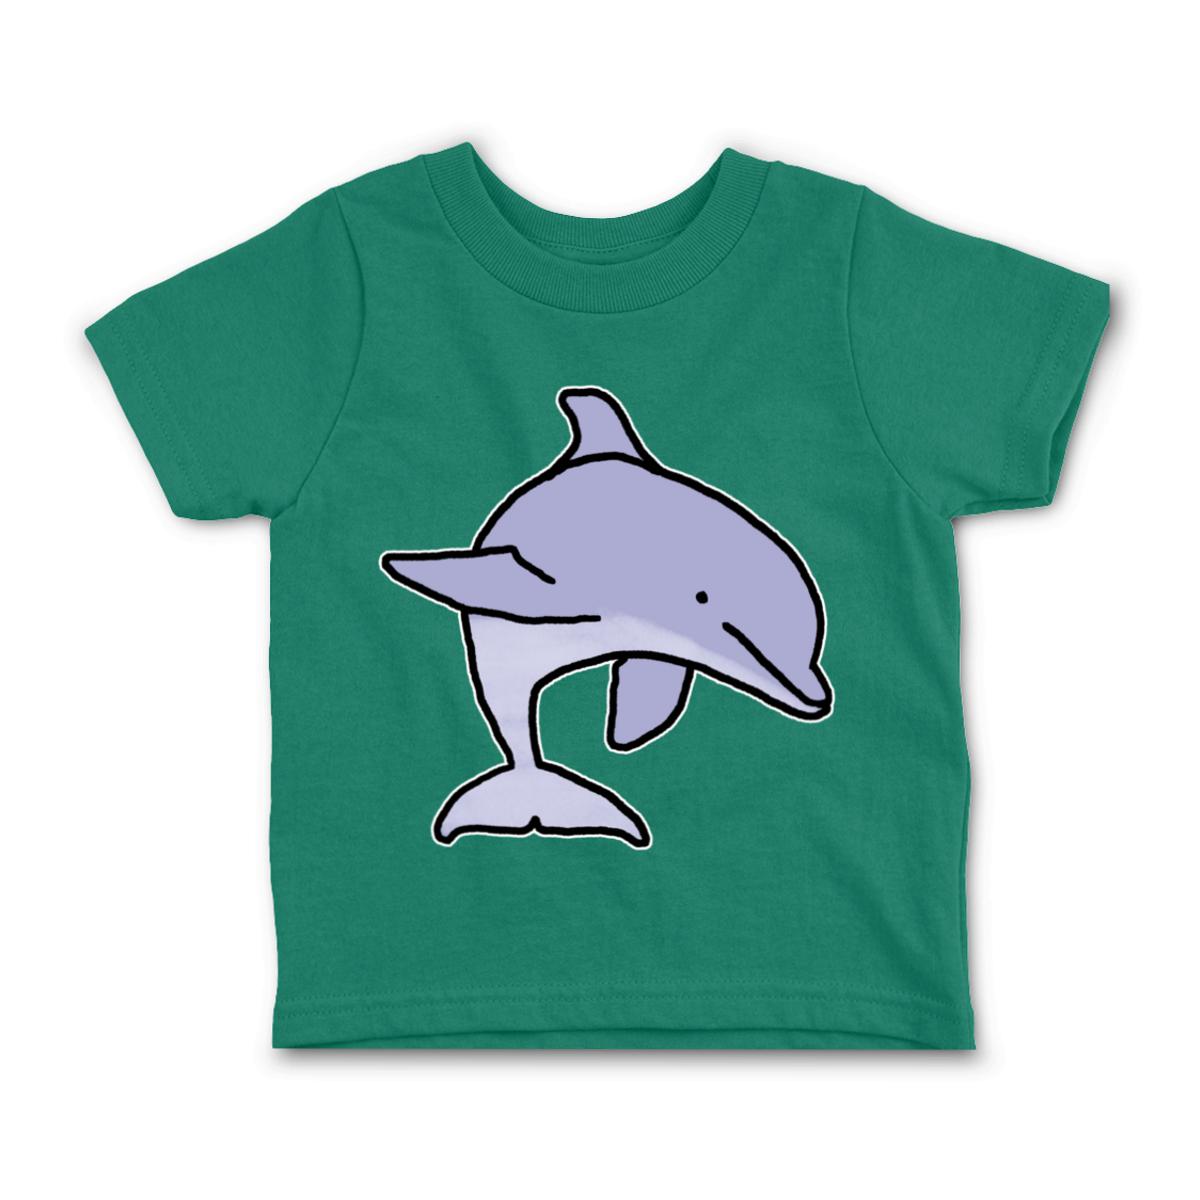 Dolphin Toddler Tee 56T kelly